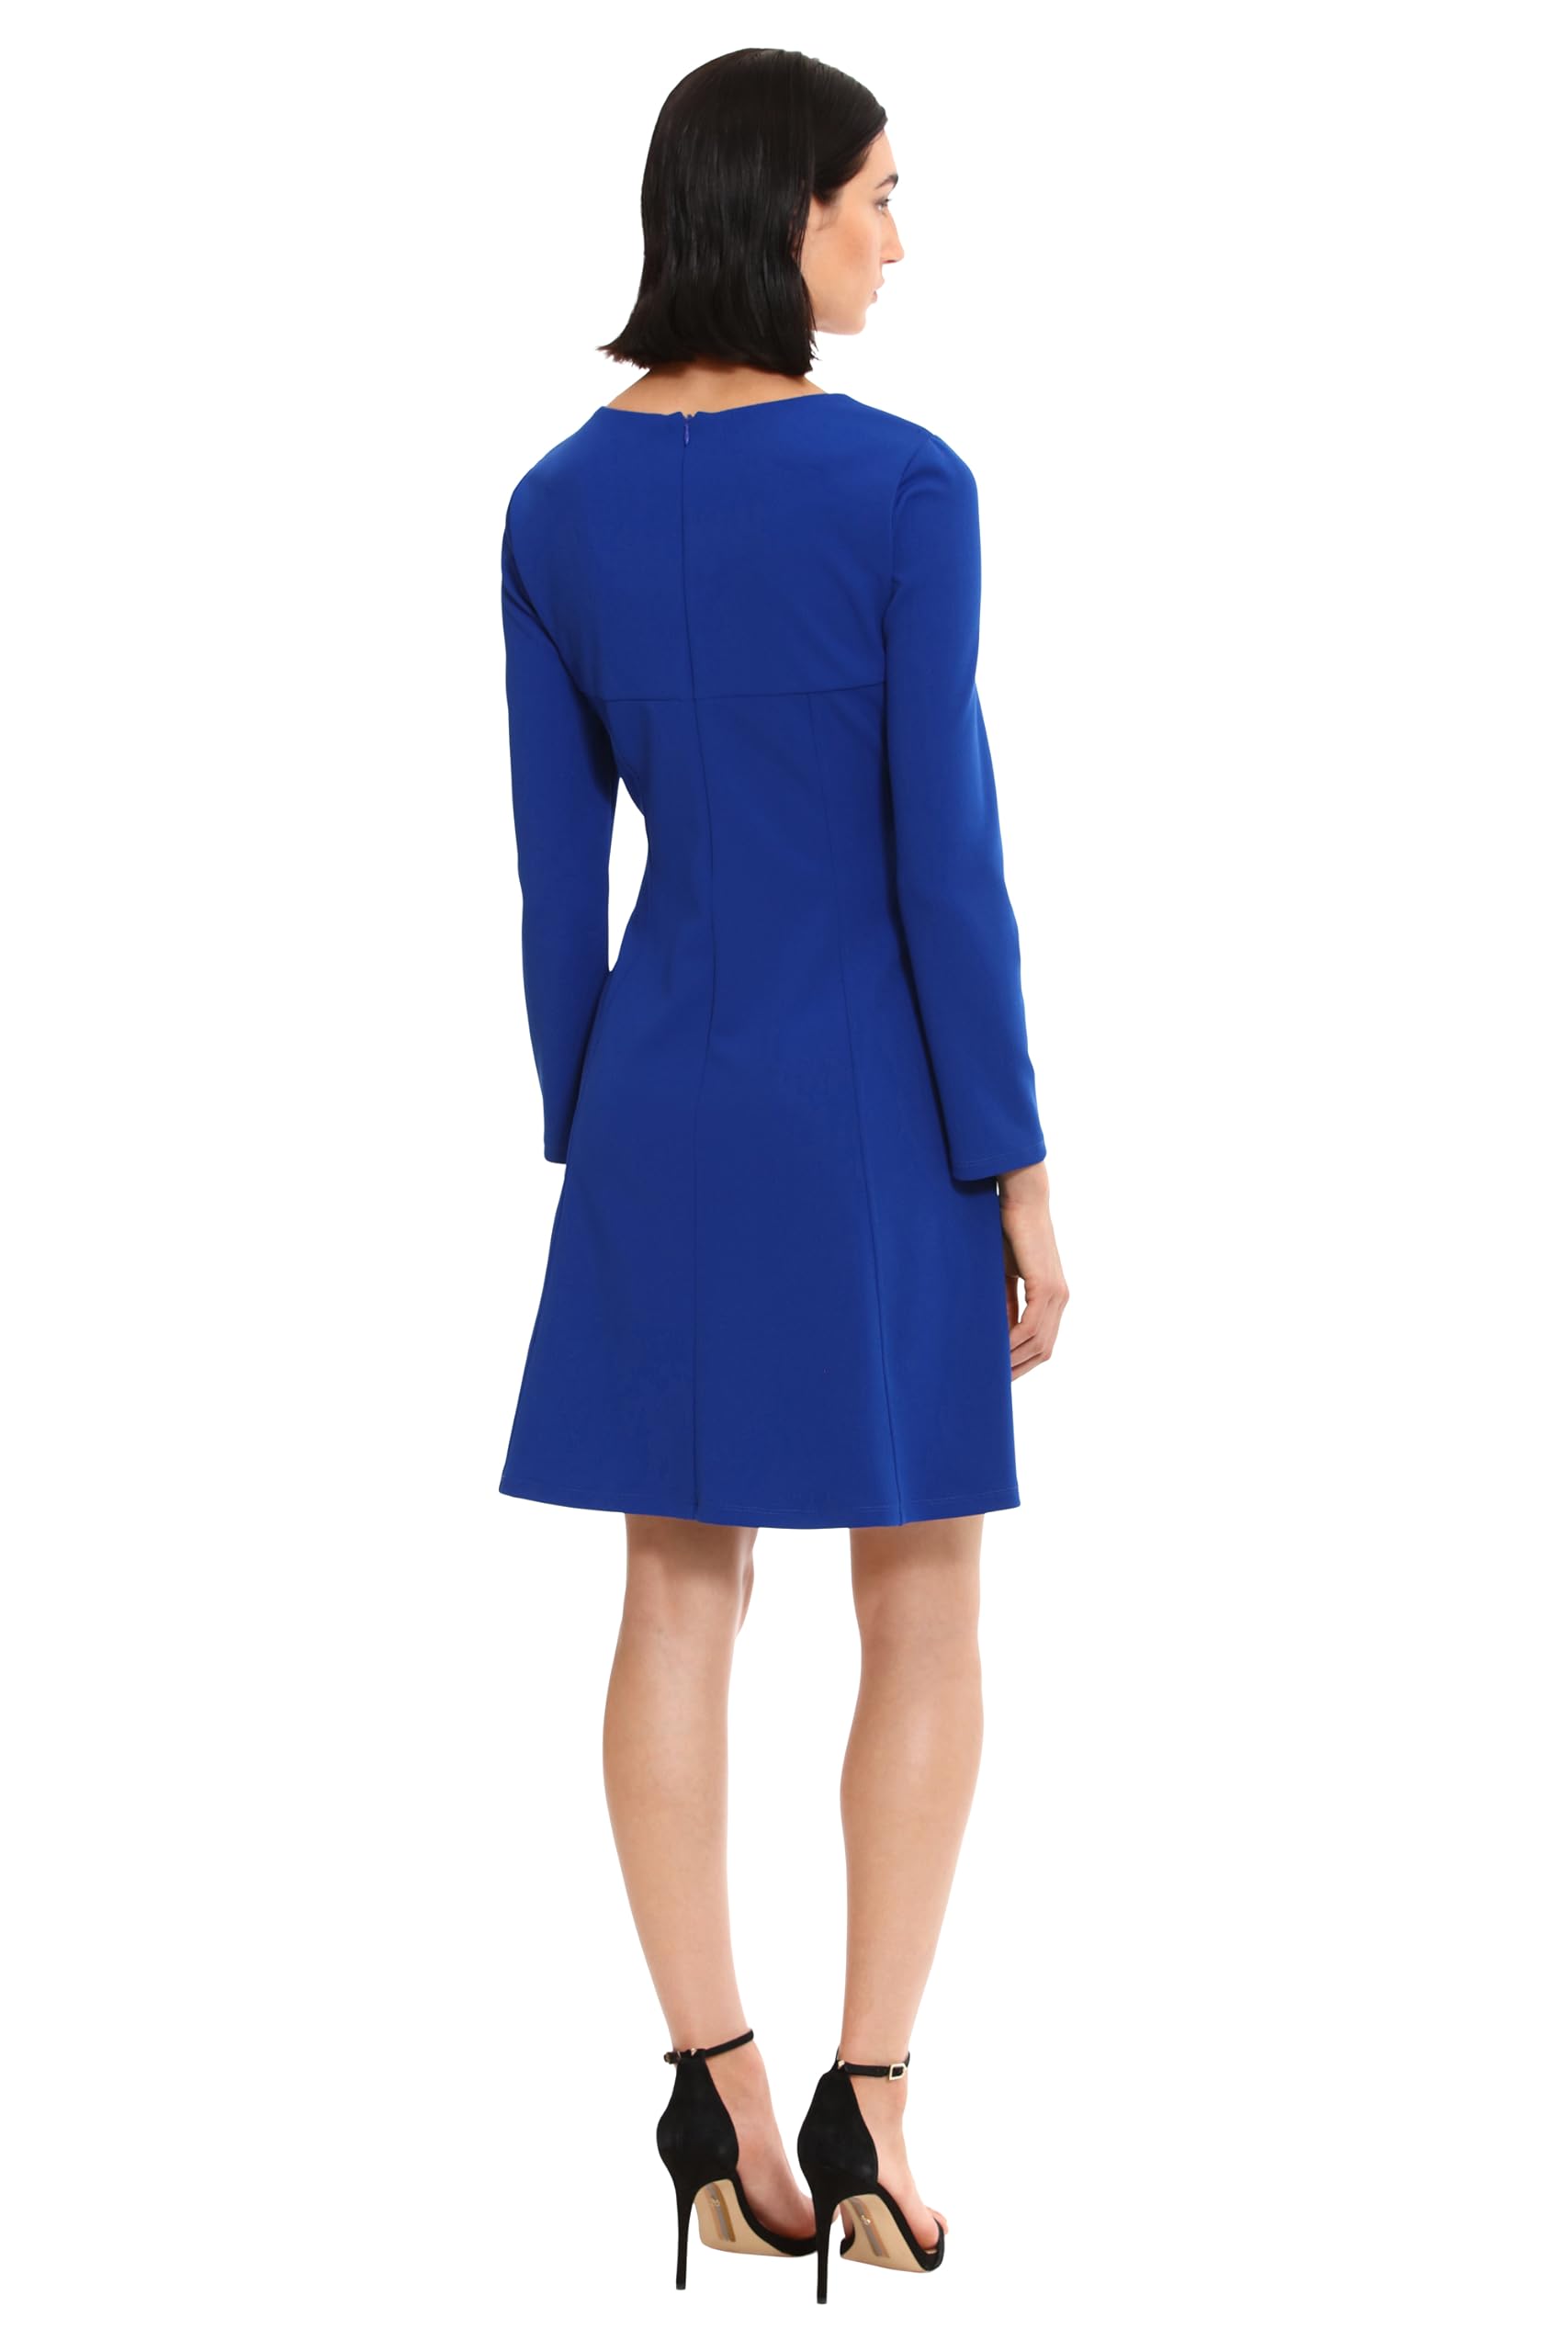 Donna Morgan Women's Long Sleeve Fit and Flare Crepe U-Ring Trim Dress Workwear Career Office Event Guest of, Retro Blue